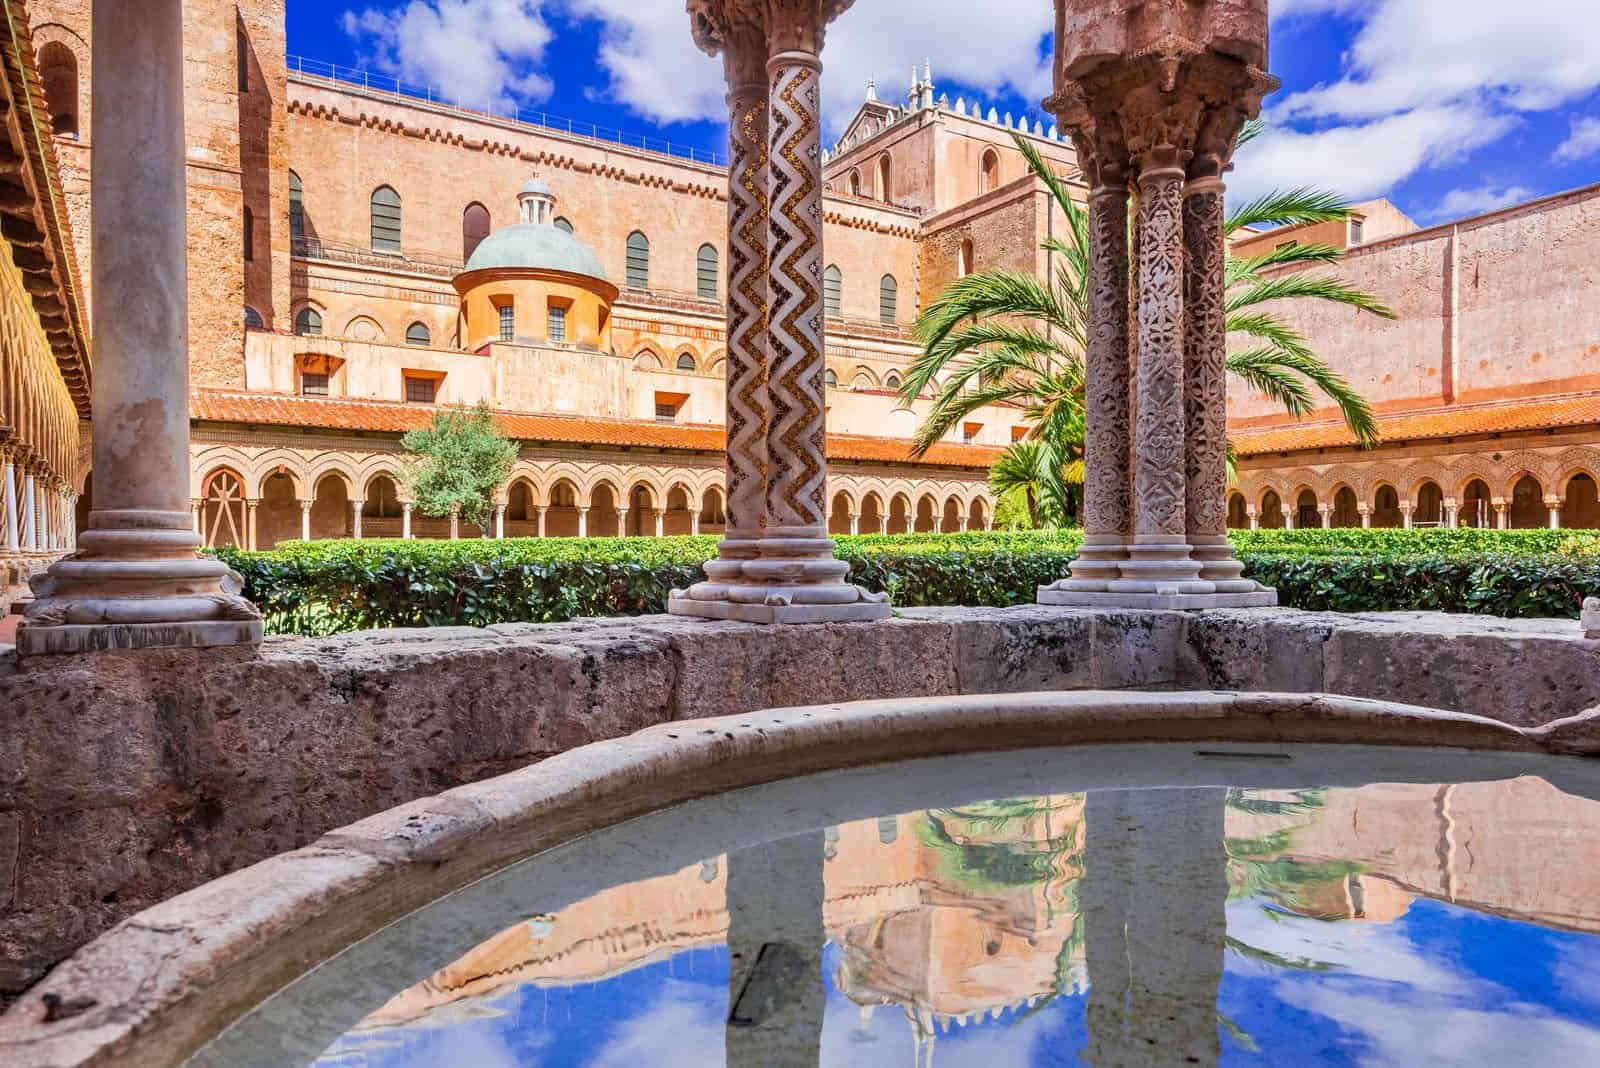 Monreale is a Norman-Byzantine cathedral in Sicily, Italy overlooking Palermo city.